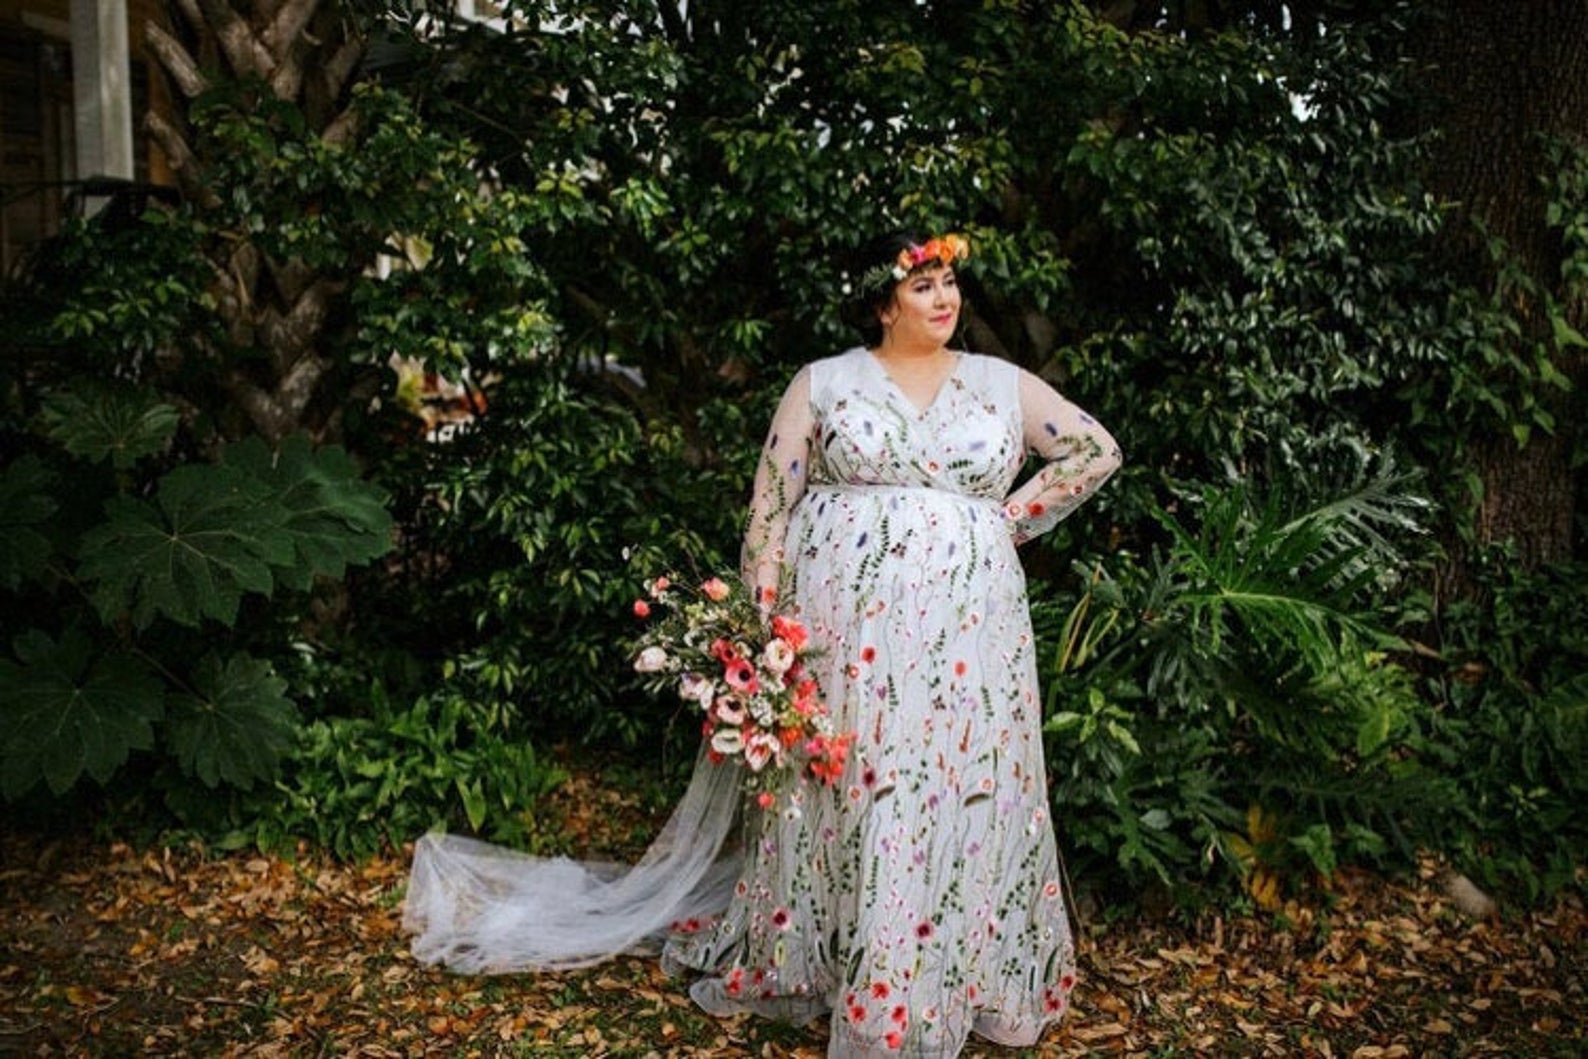 Plus size cruvy unique wedding gown with lace and floral crown